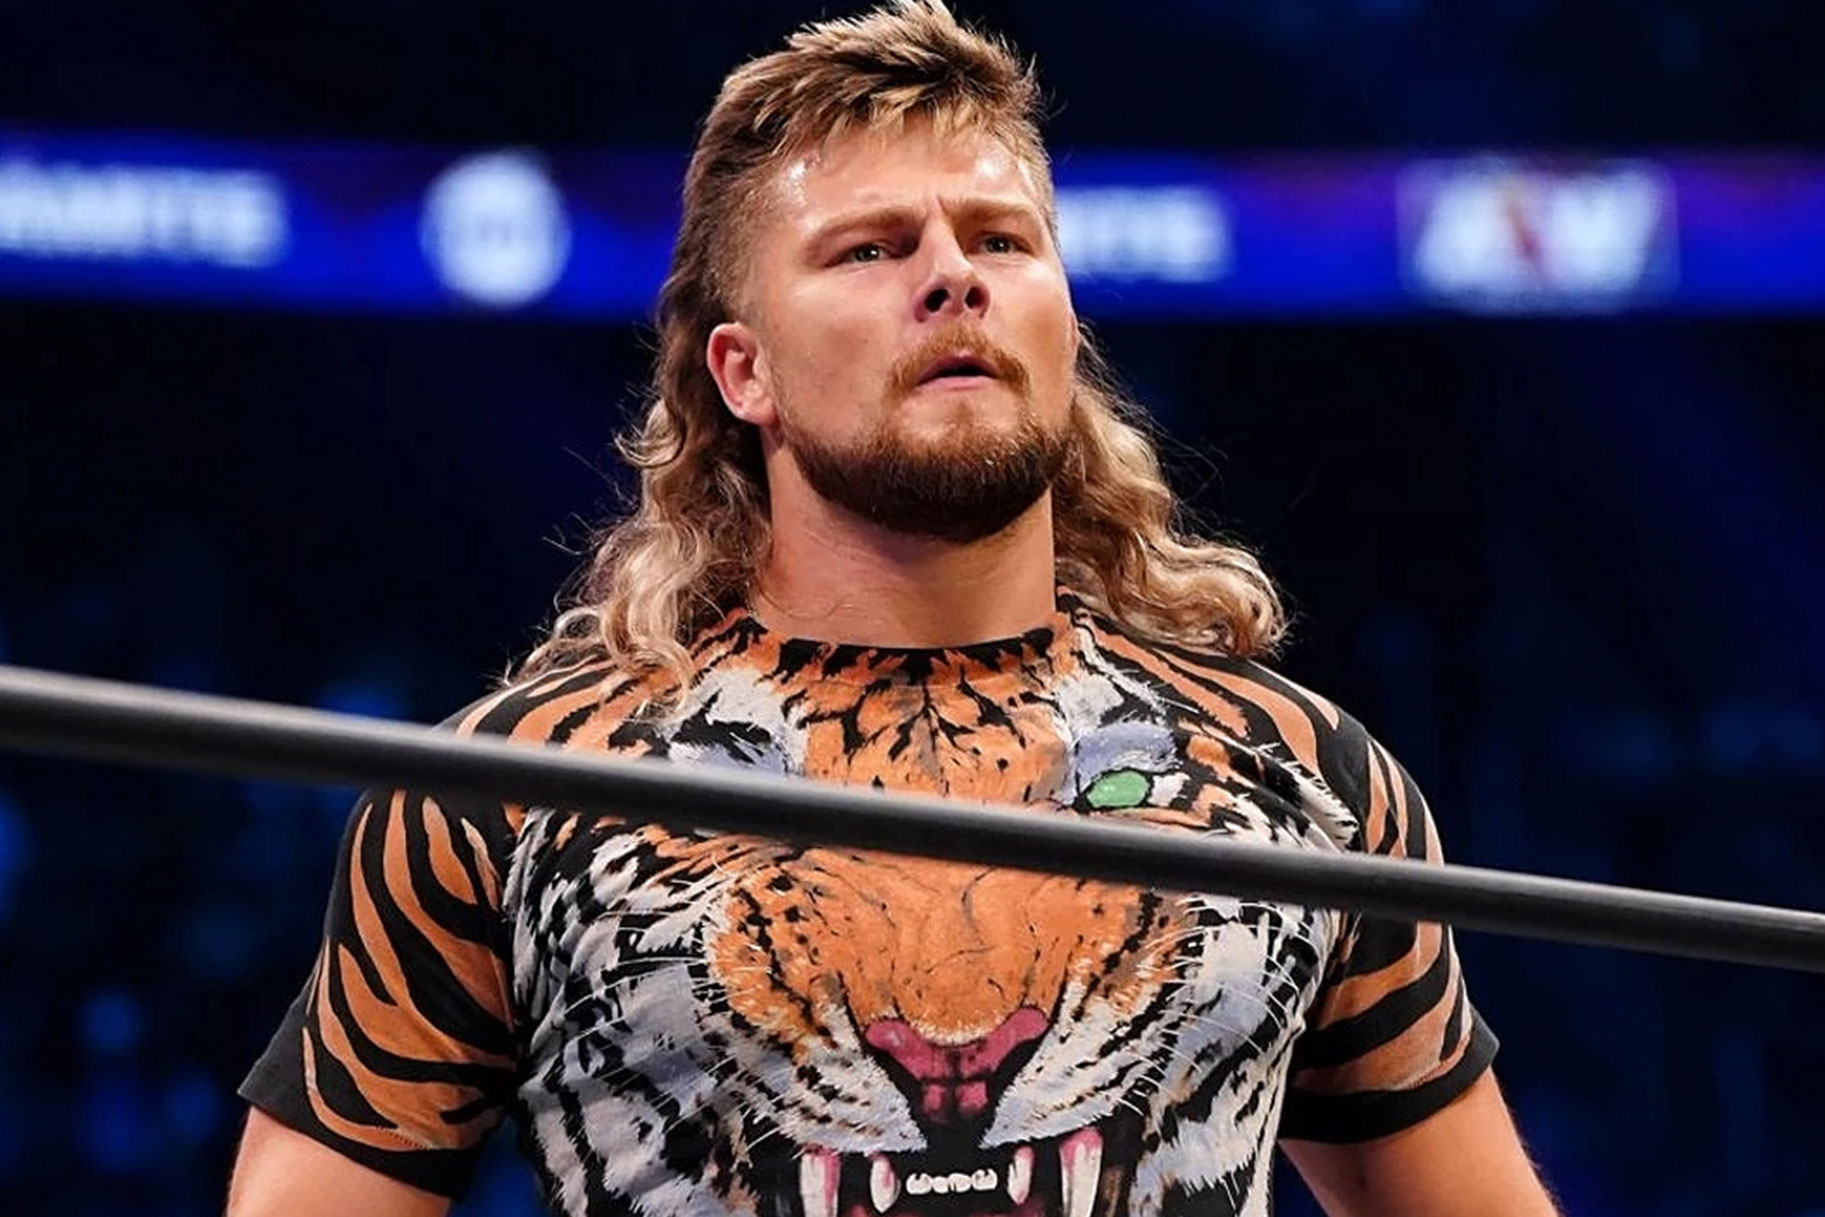 Who Is Brian Pillman, Jr? Everything to Know Following His WWE NXT Debut